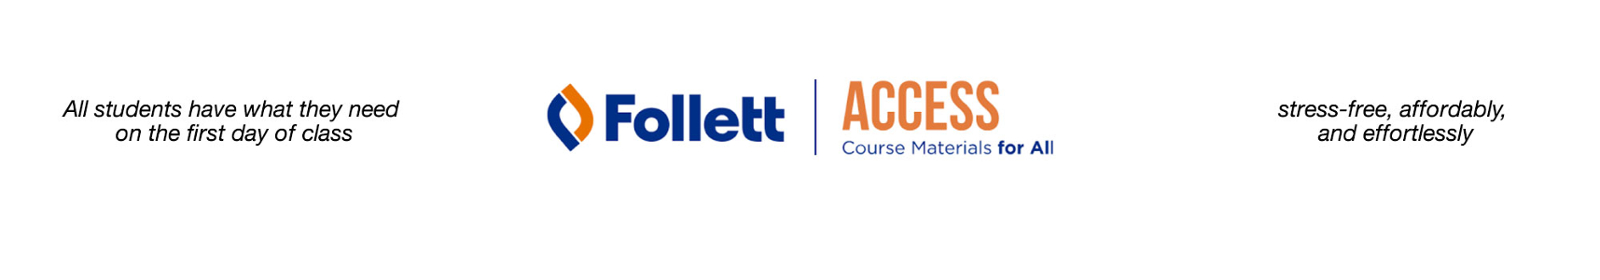 all students have what they need on the first day of school. stress-free , affordly and effortlessly and follett access logo